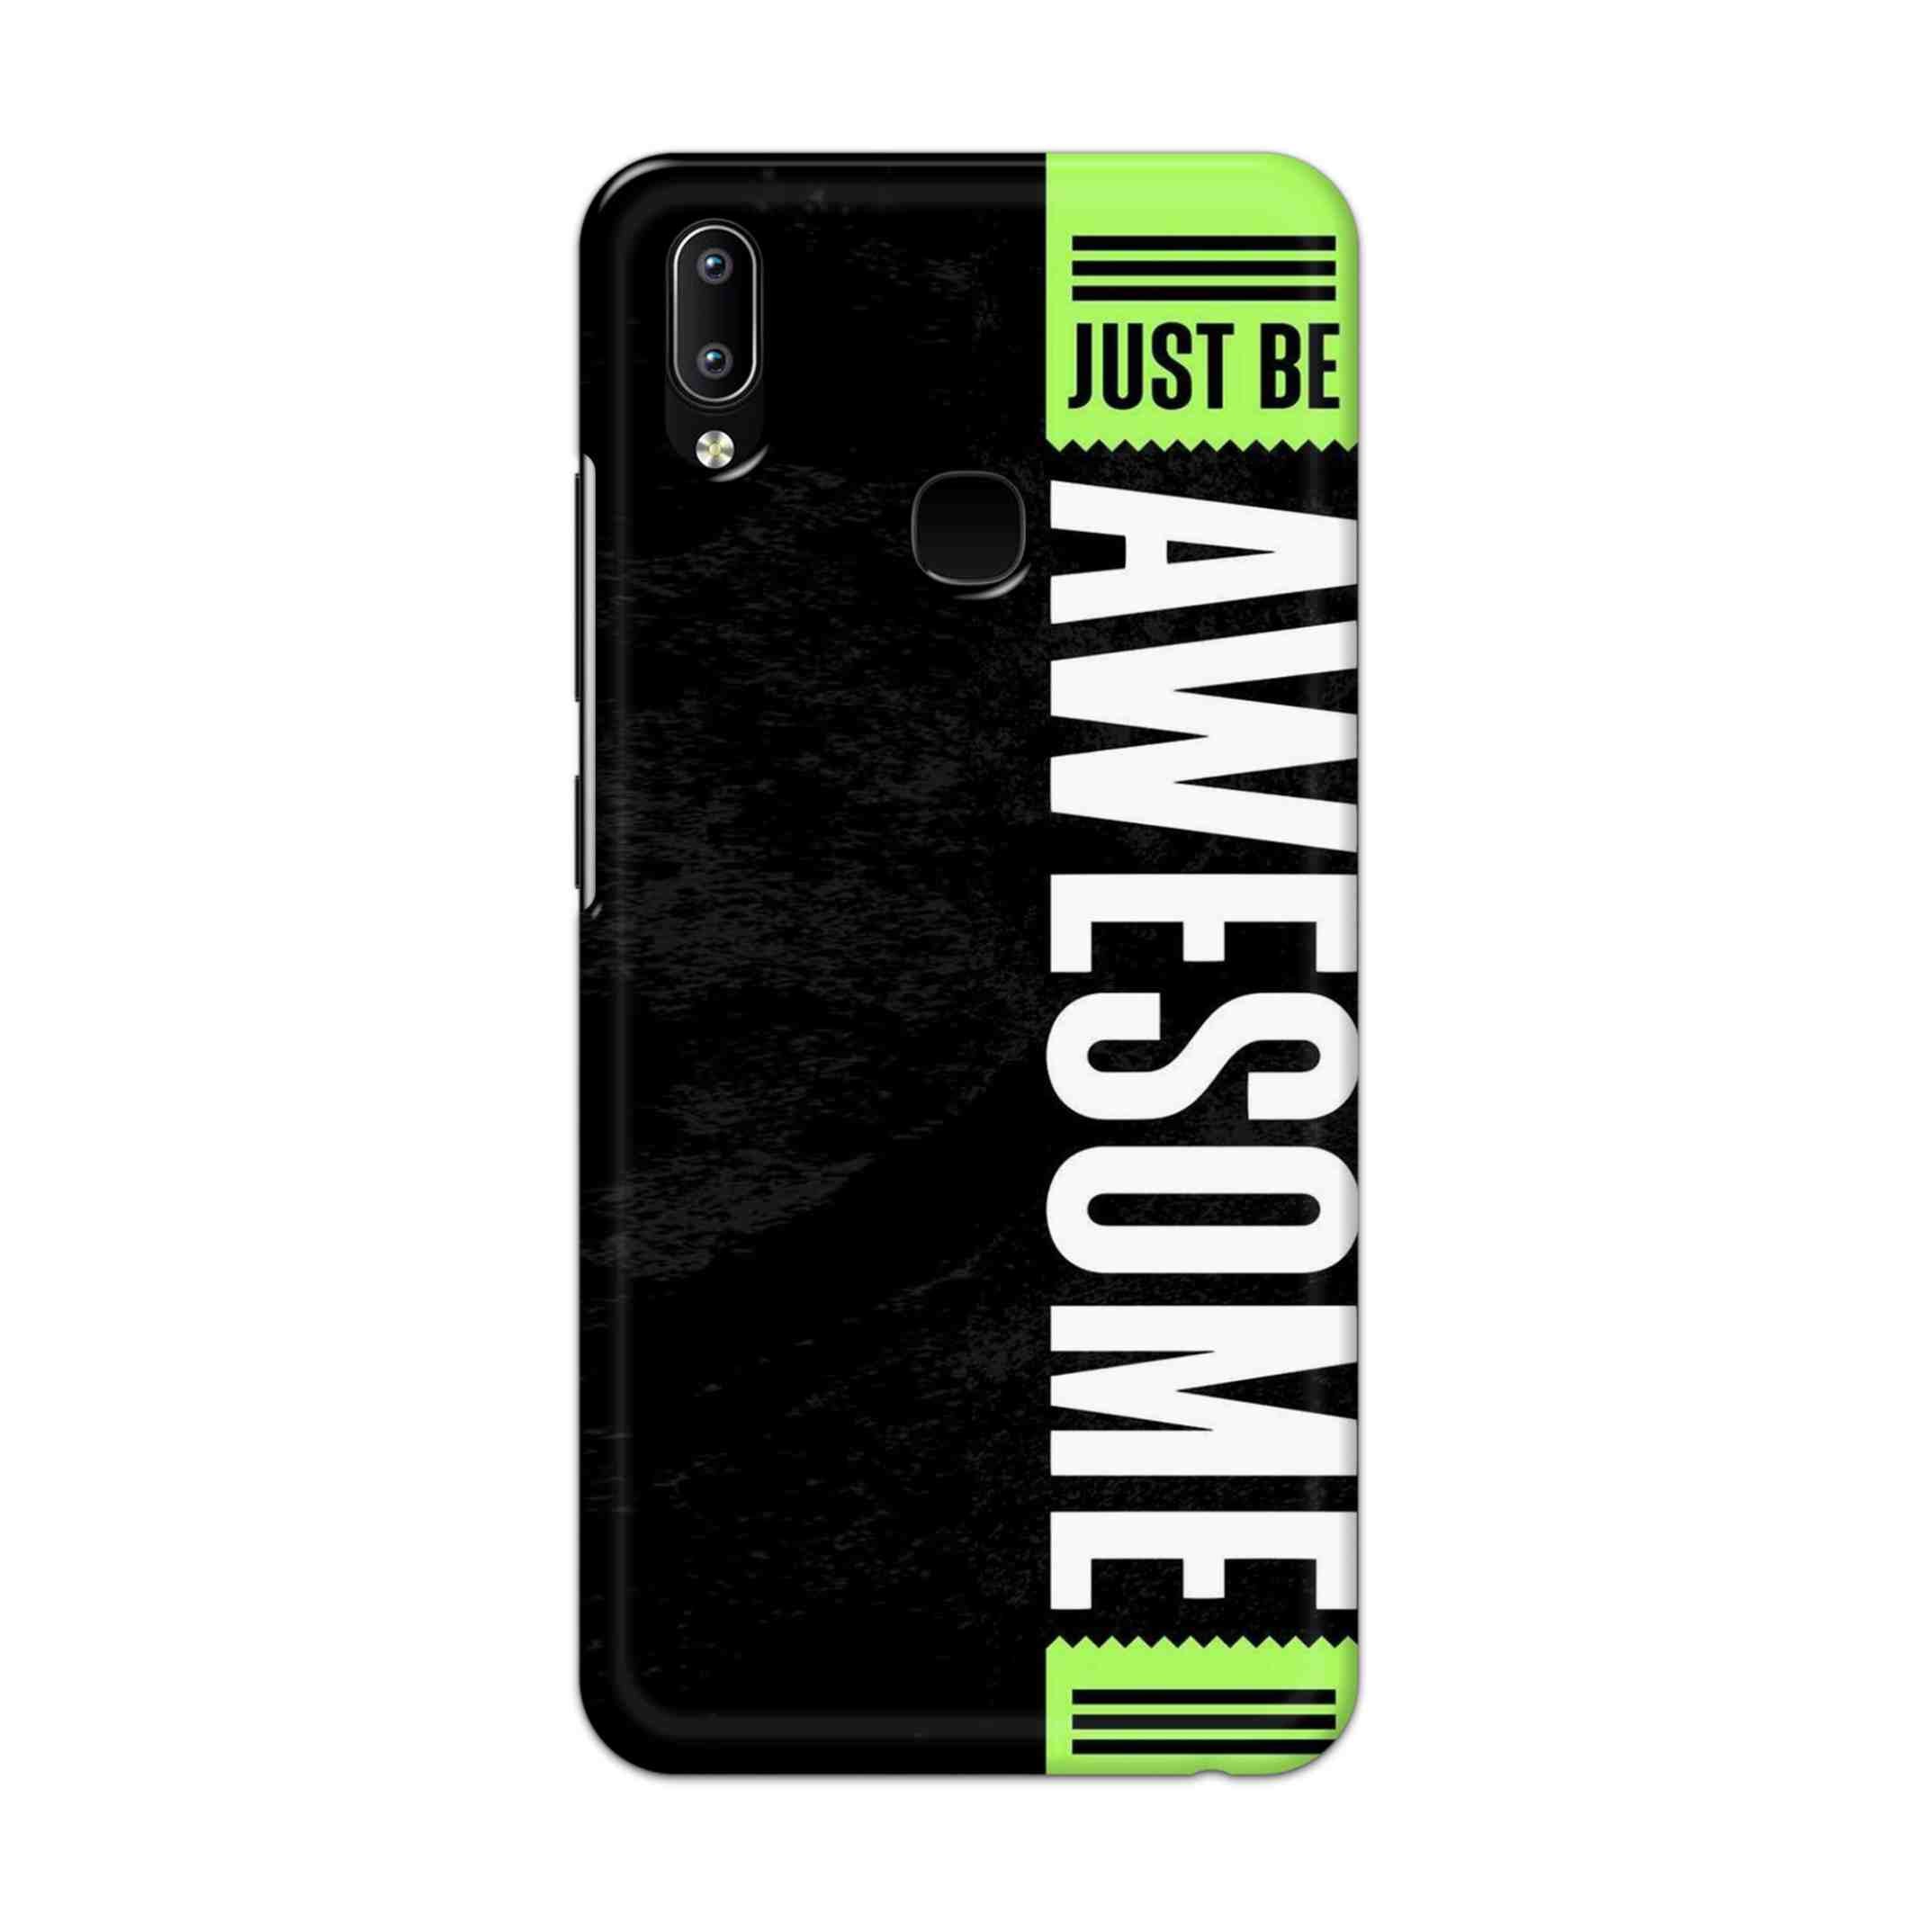 Buy Awesome Street Hard Back Mobile Phone Case Cover For Vivo Y95 / Y93 / Y91 Online